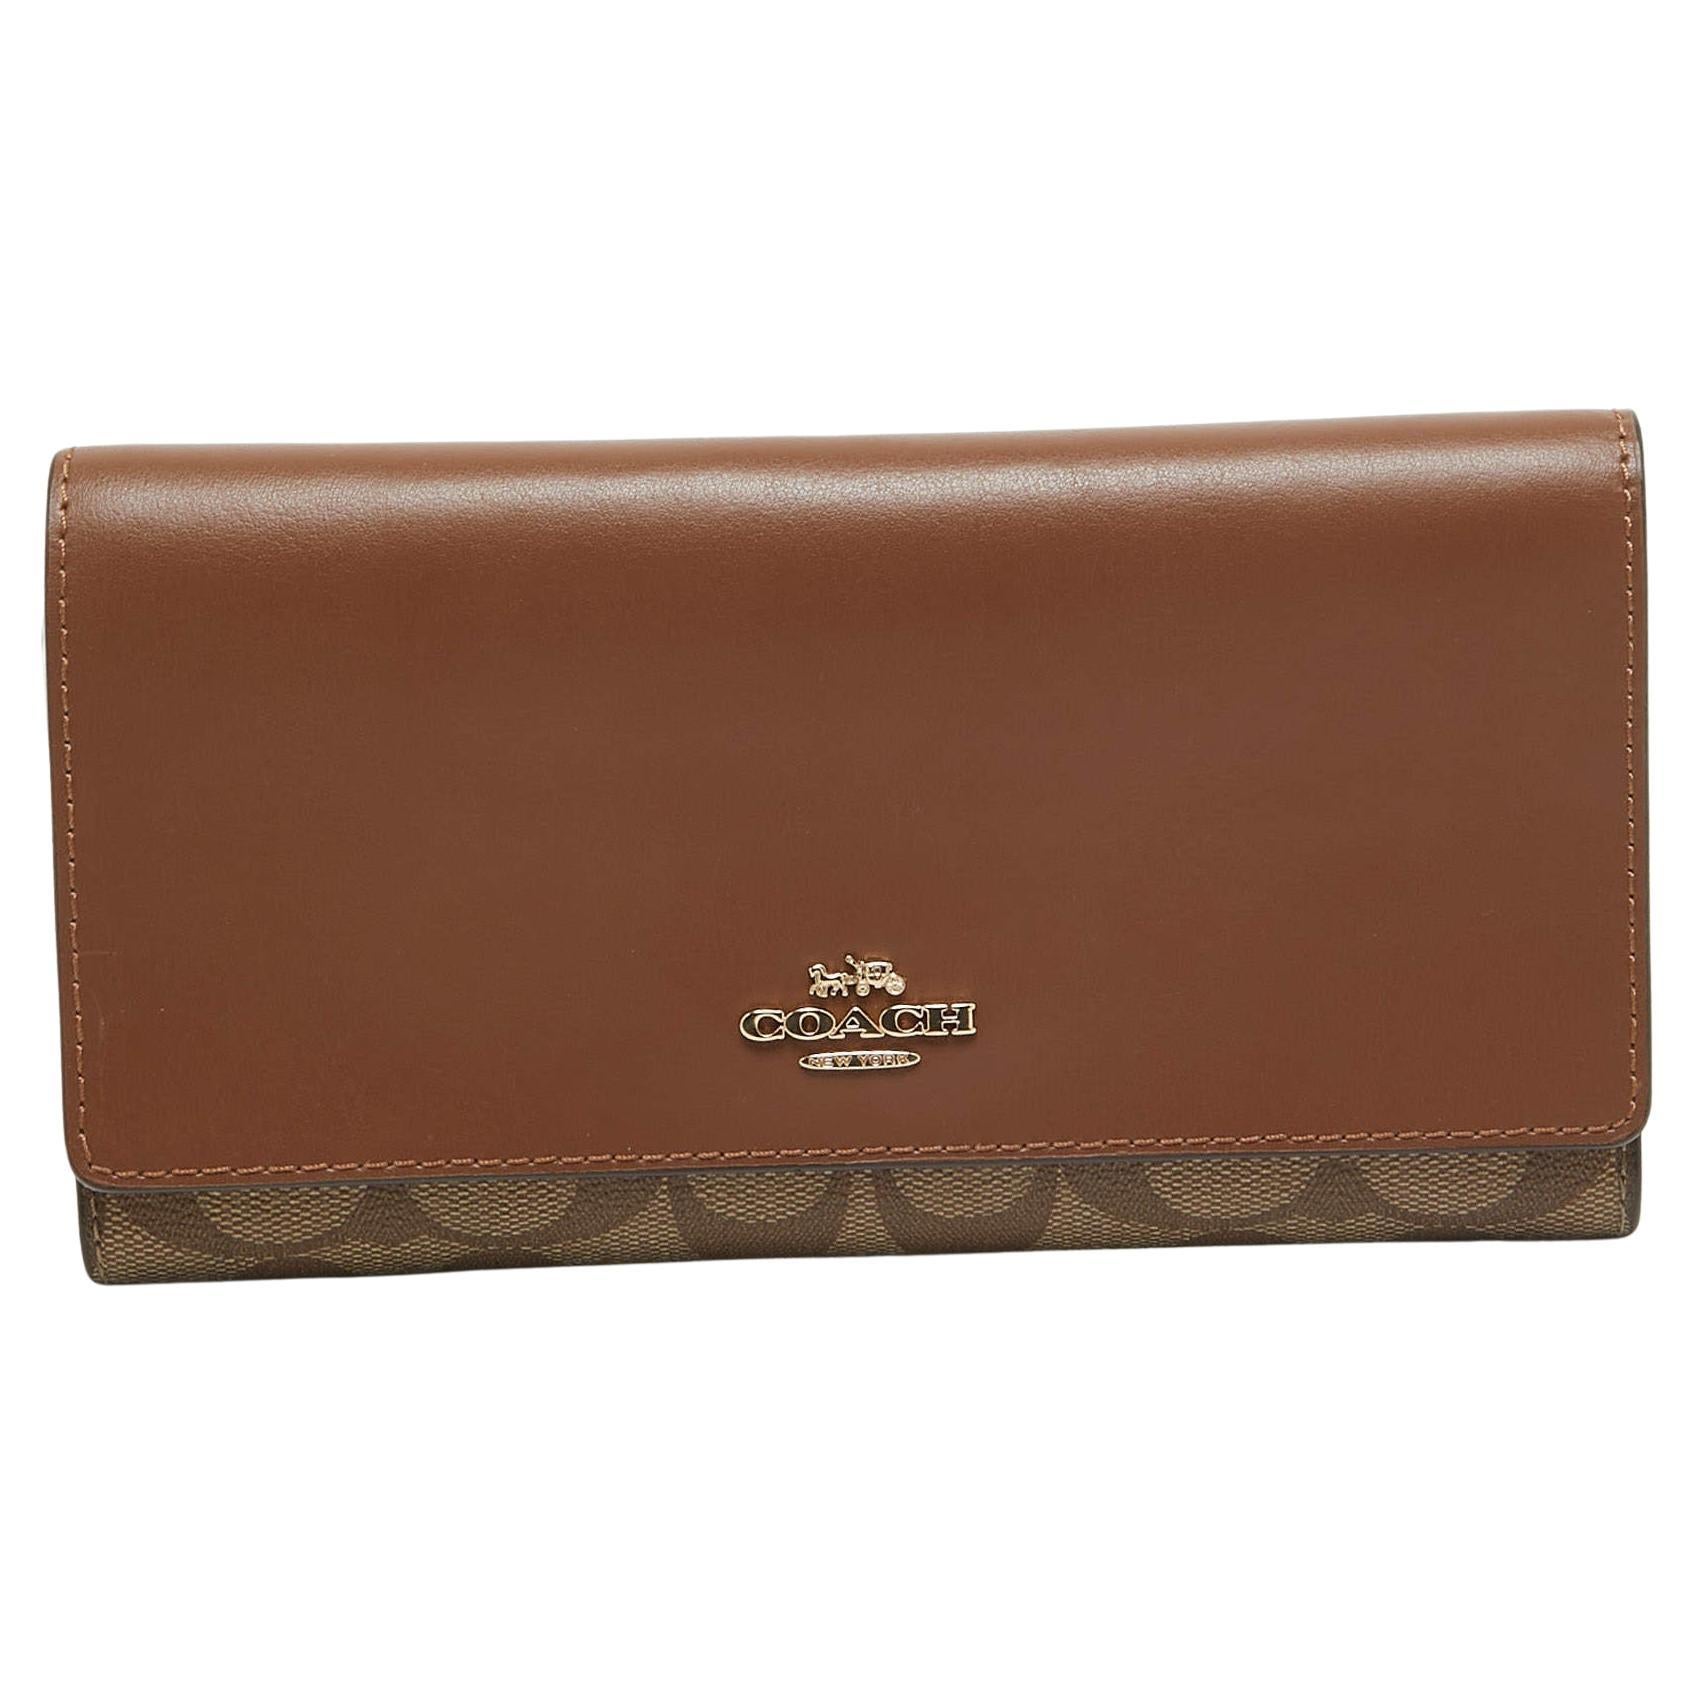 Coach Brown/Beige Signature Coated Canvas and Leather Trifold Long Wallet en vente